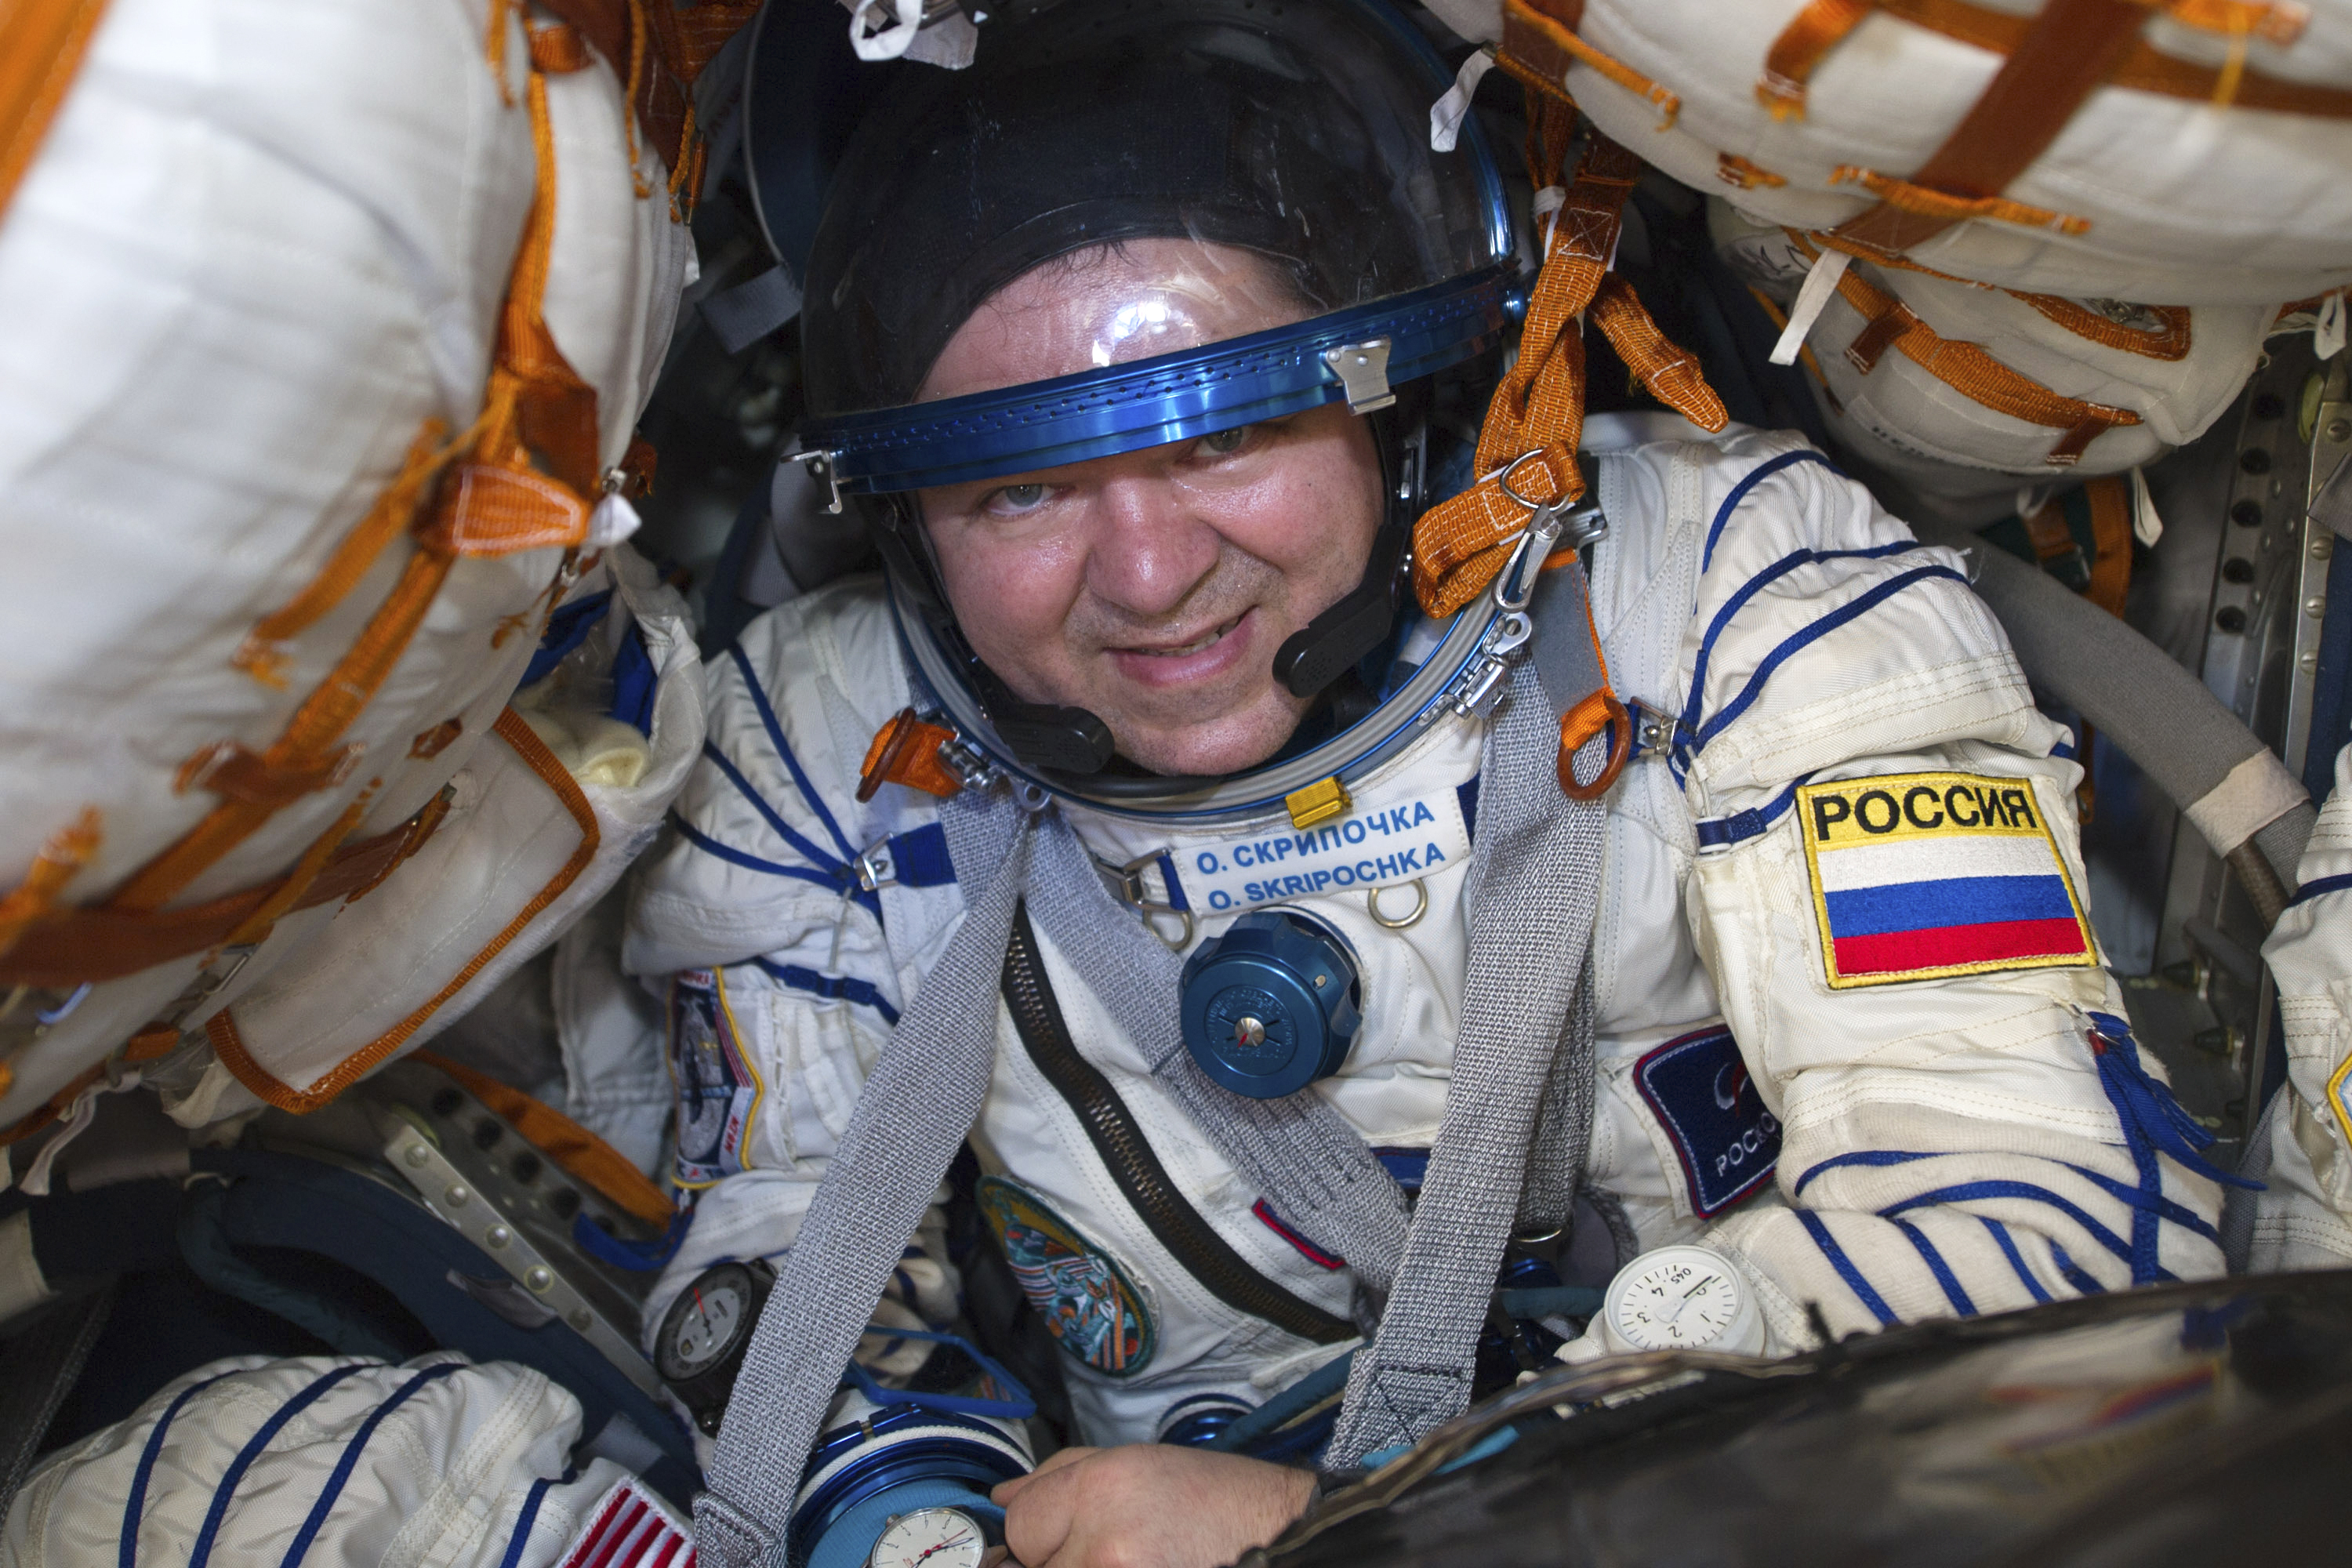 Russian space agency Roscosmos' Oleg Skripochka sits in the capsule shortly after the landing of the Russian Soyuz MS-15 space capsule near Kazakh town of Dzhezkazgan, Kazakhstan, on Friday.